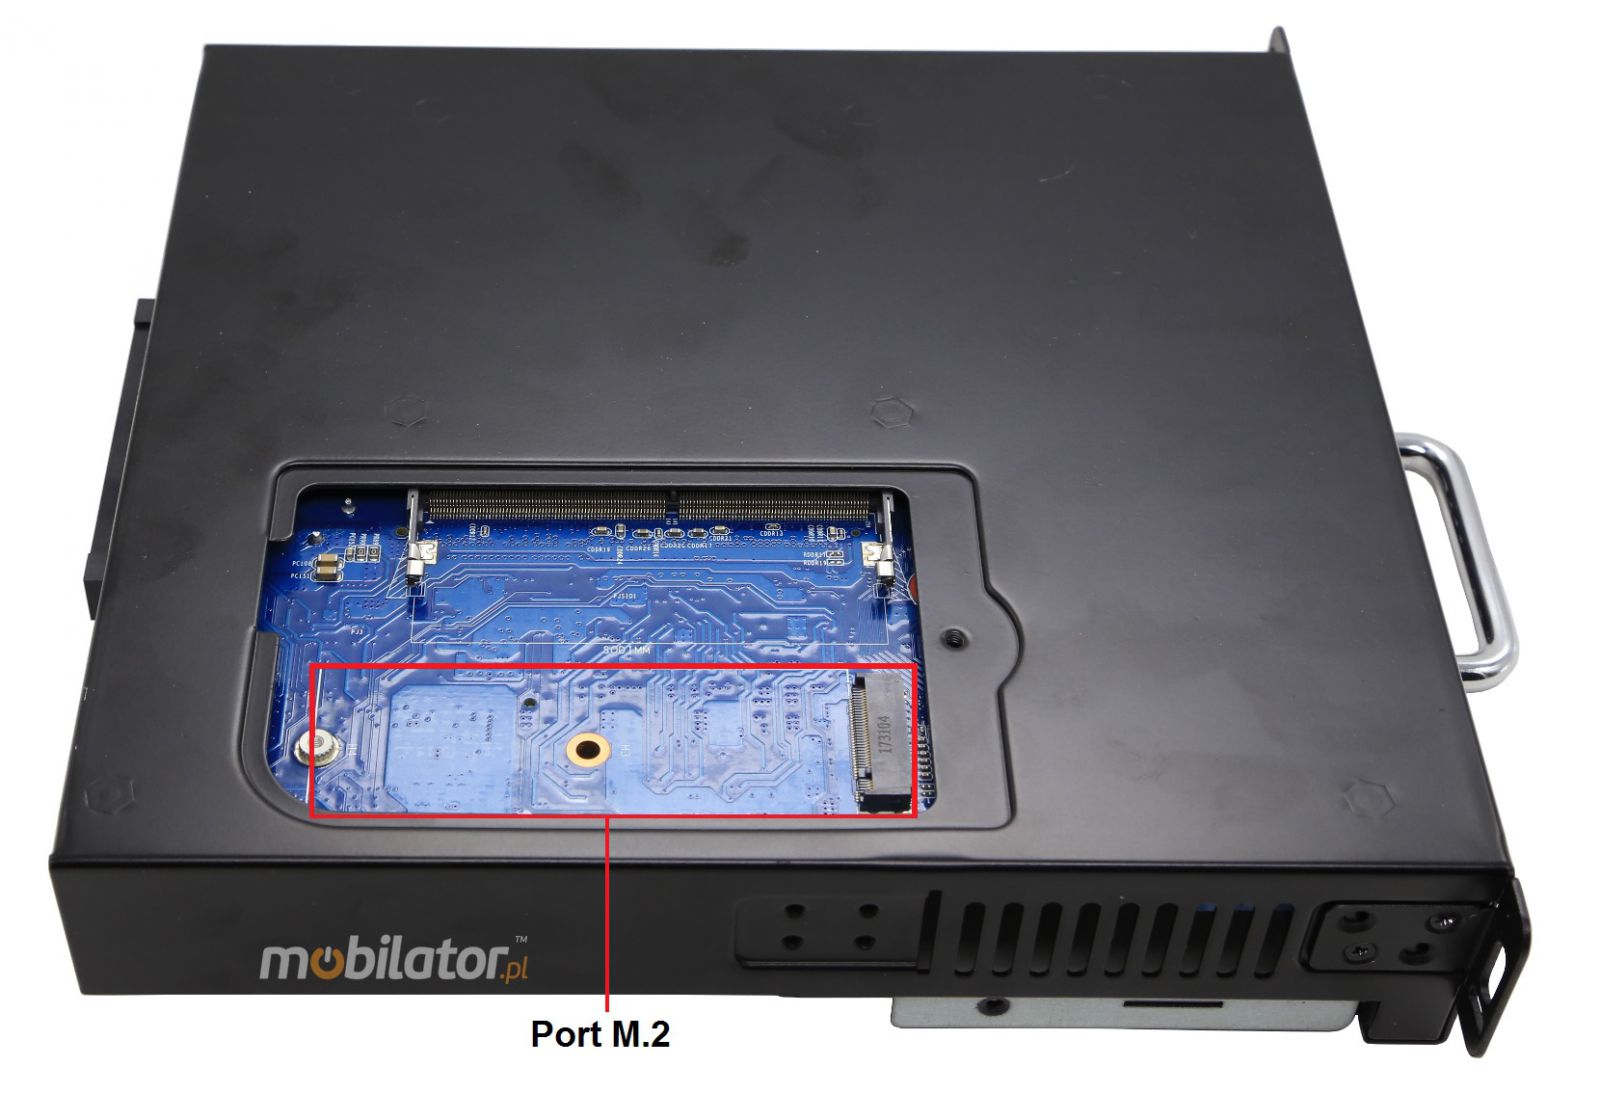 Strengthened Industrial Computer with a M.2 Port  Port M2